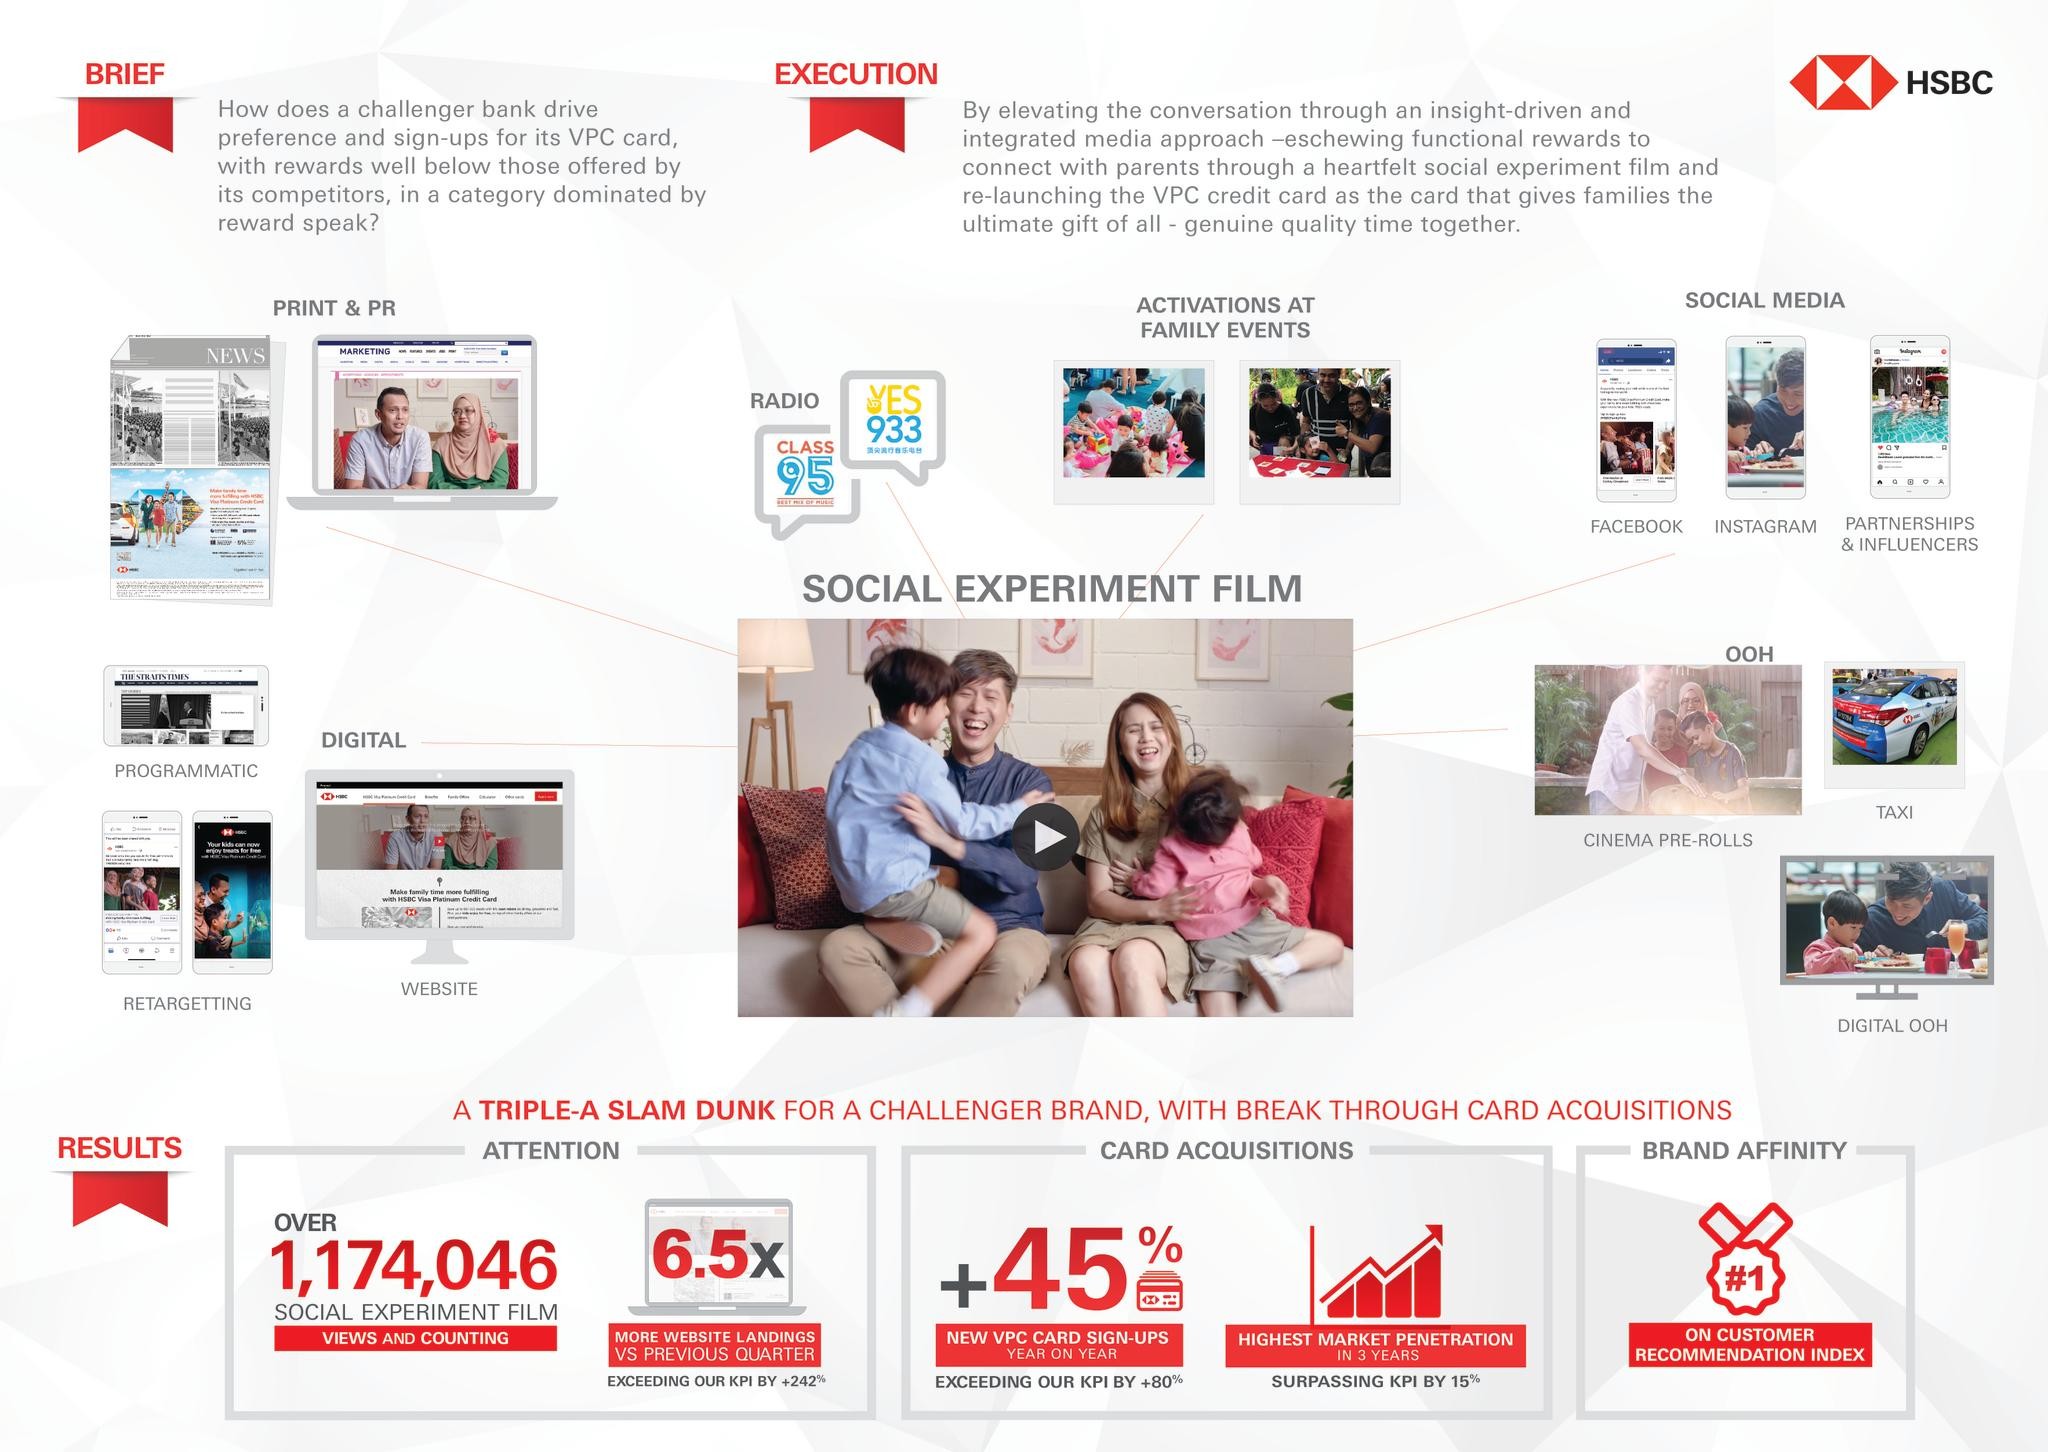 HSBC Visa Platinum Credit Card Re-launch Campaign “Make Family Time More Fulfill